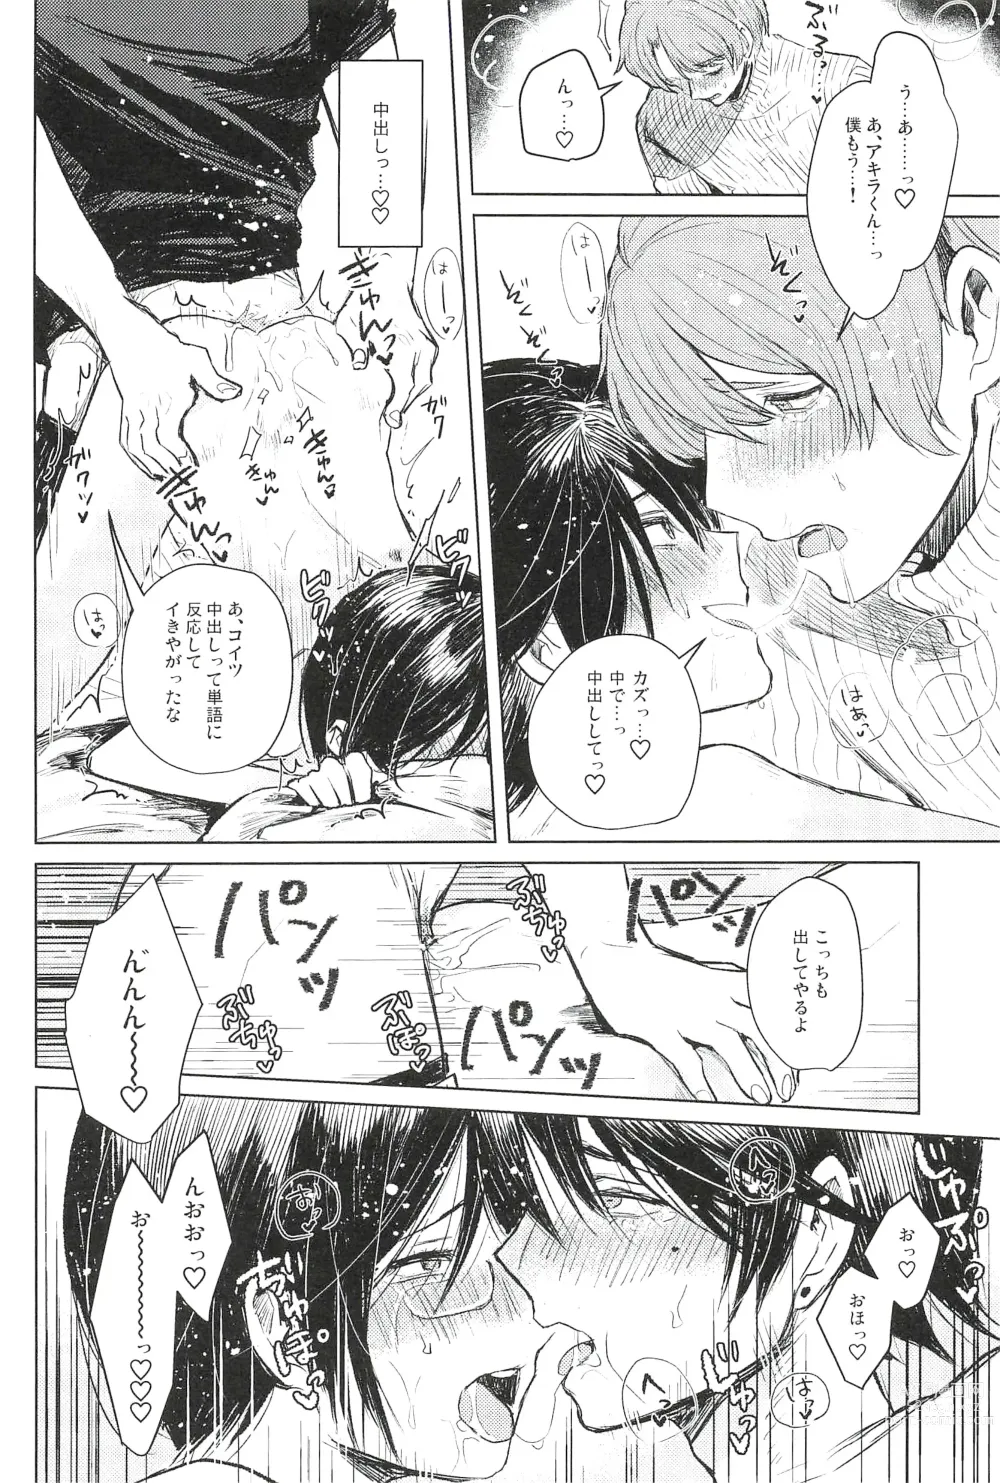 Page 26 of doujinshi ONE MORE 4P